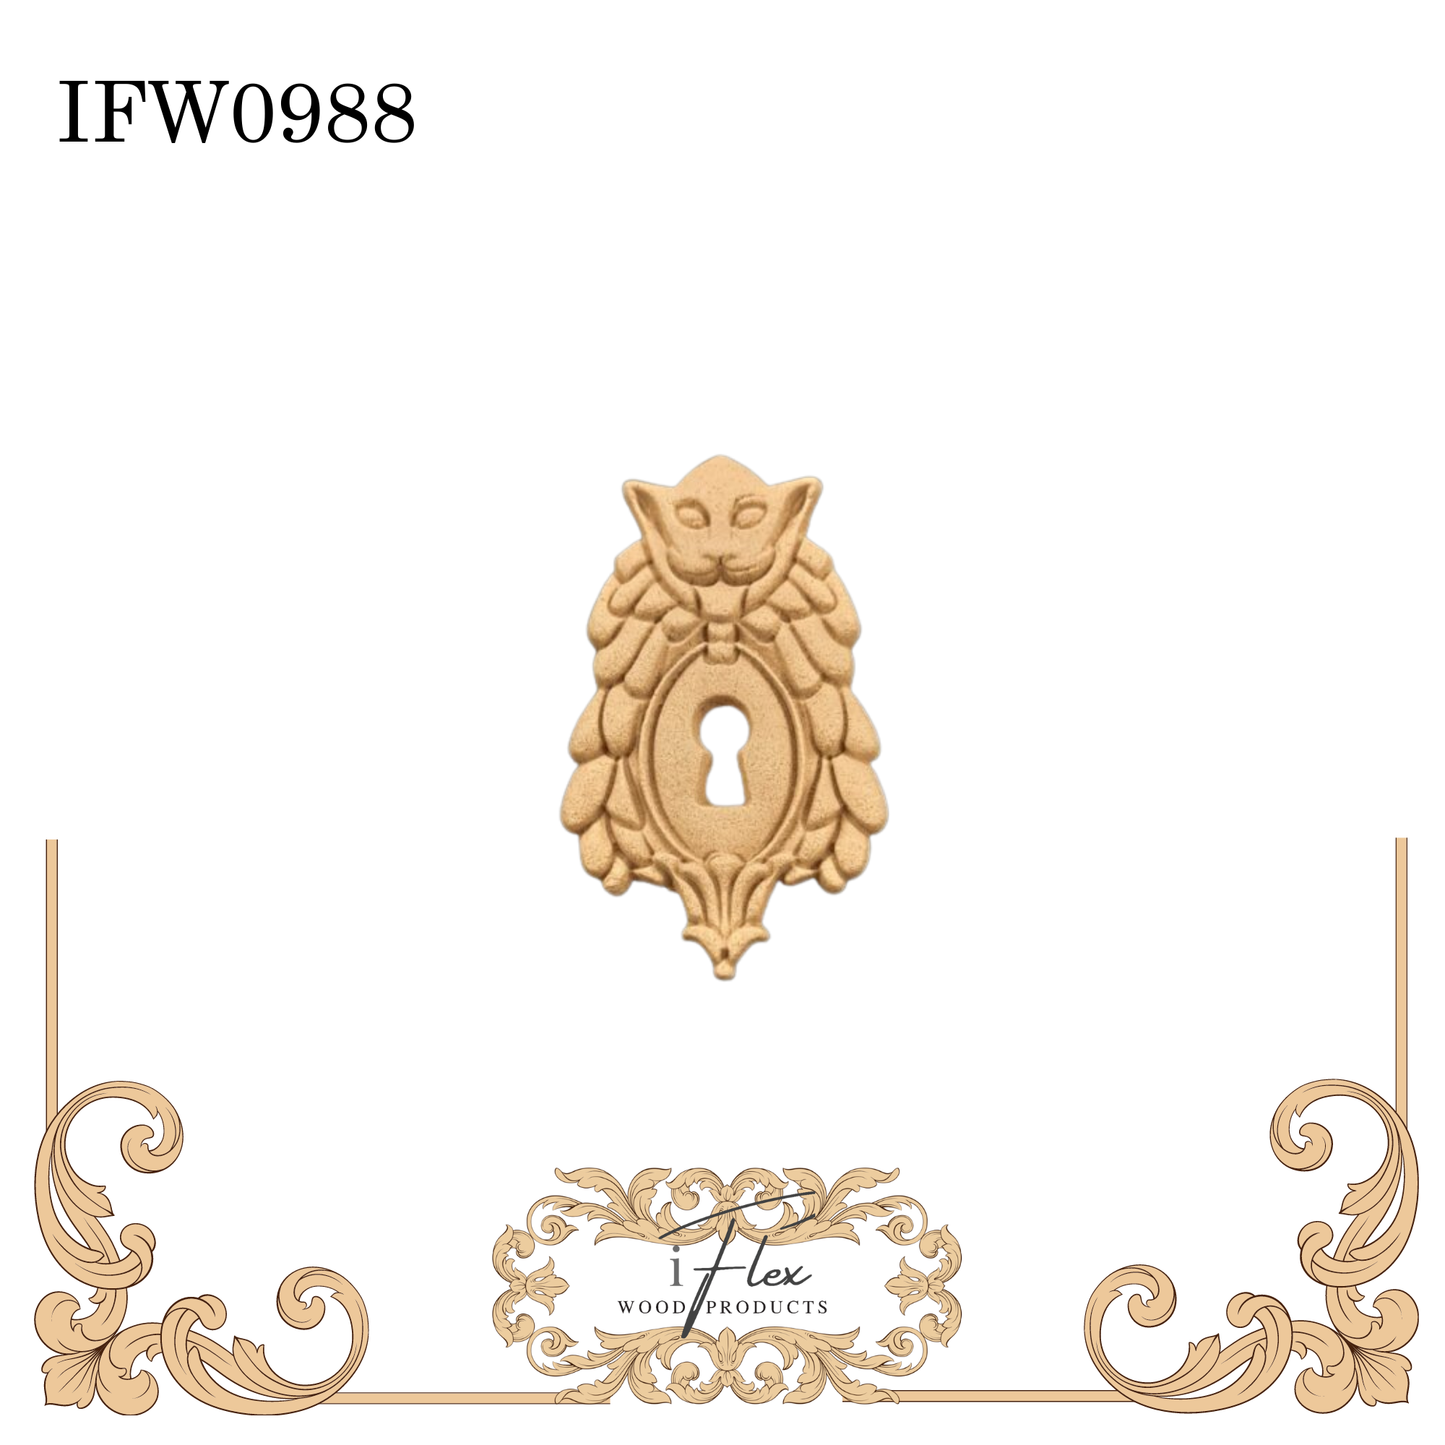 IFW 0988 iFlex Wood Products, bendable mouldings, flexible, wooden appliques, keyhole